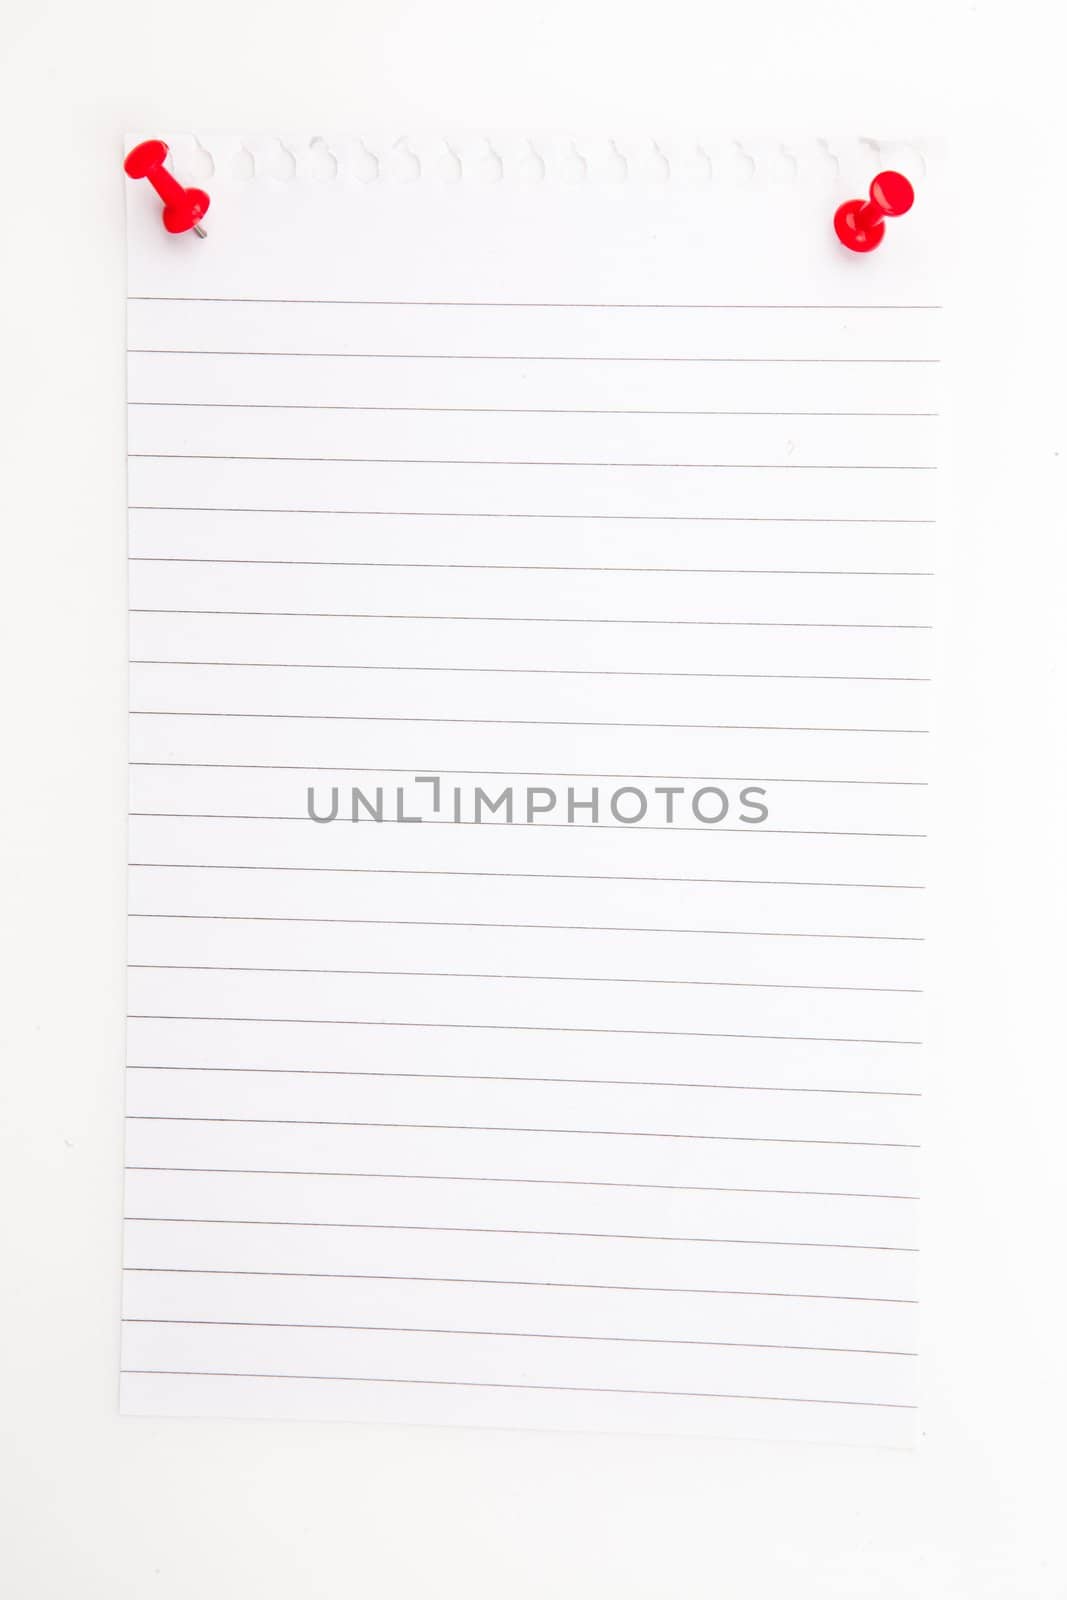 Blank paper with red pushpin against a white background